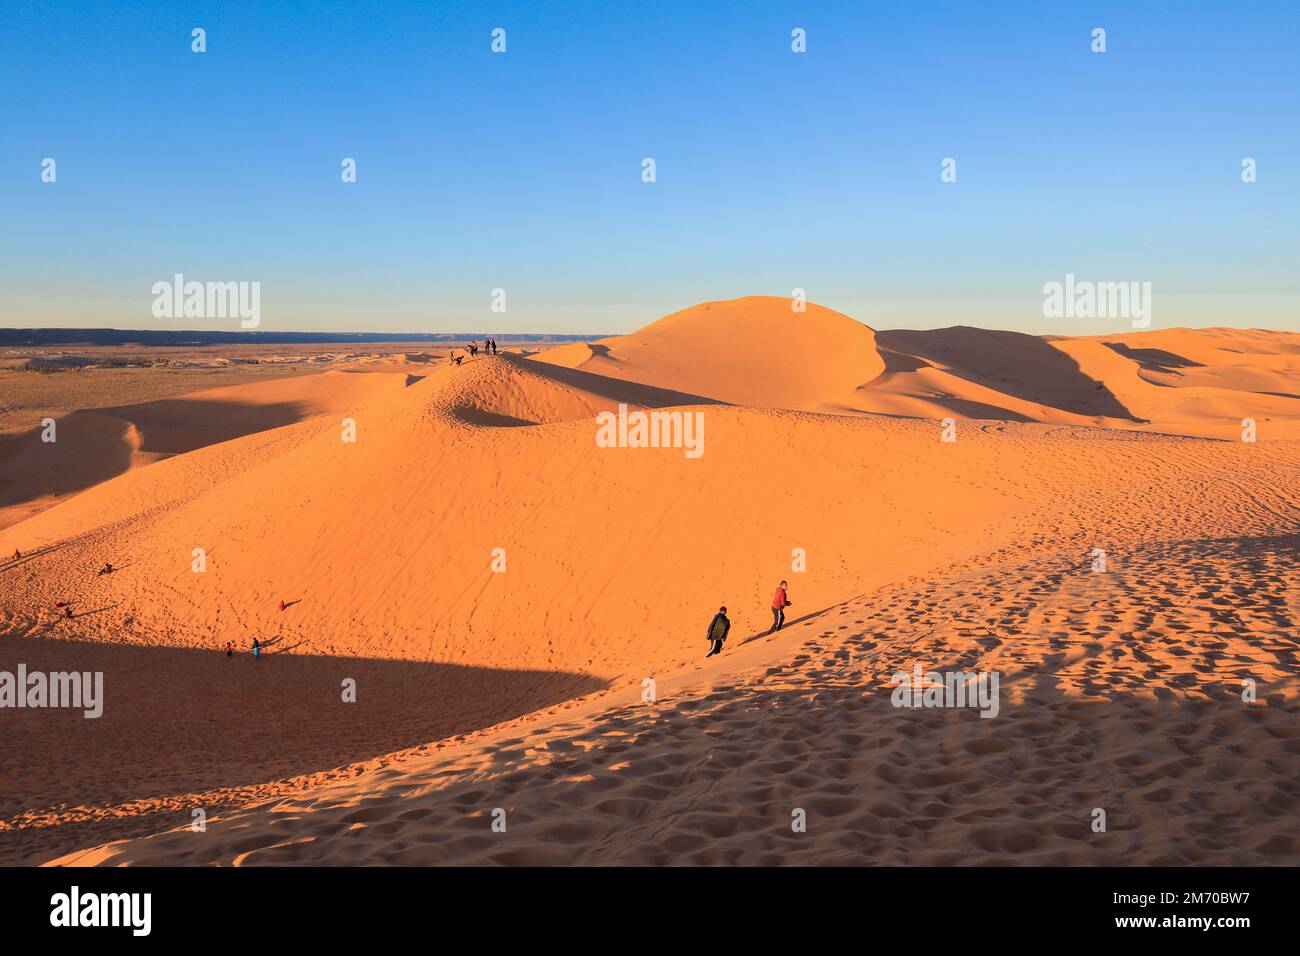 Amazing View to the Golden Sahara Desert Sands near the oasis town Taghit, Algeria Stock Photo